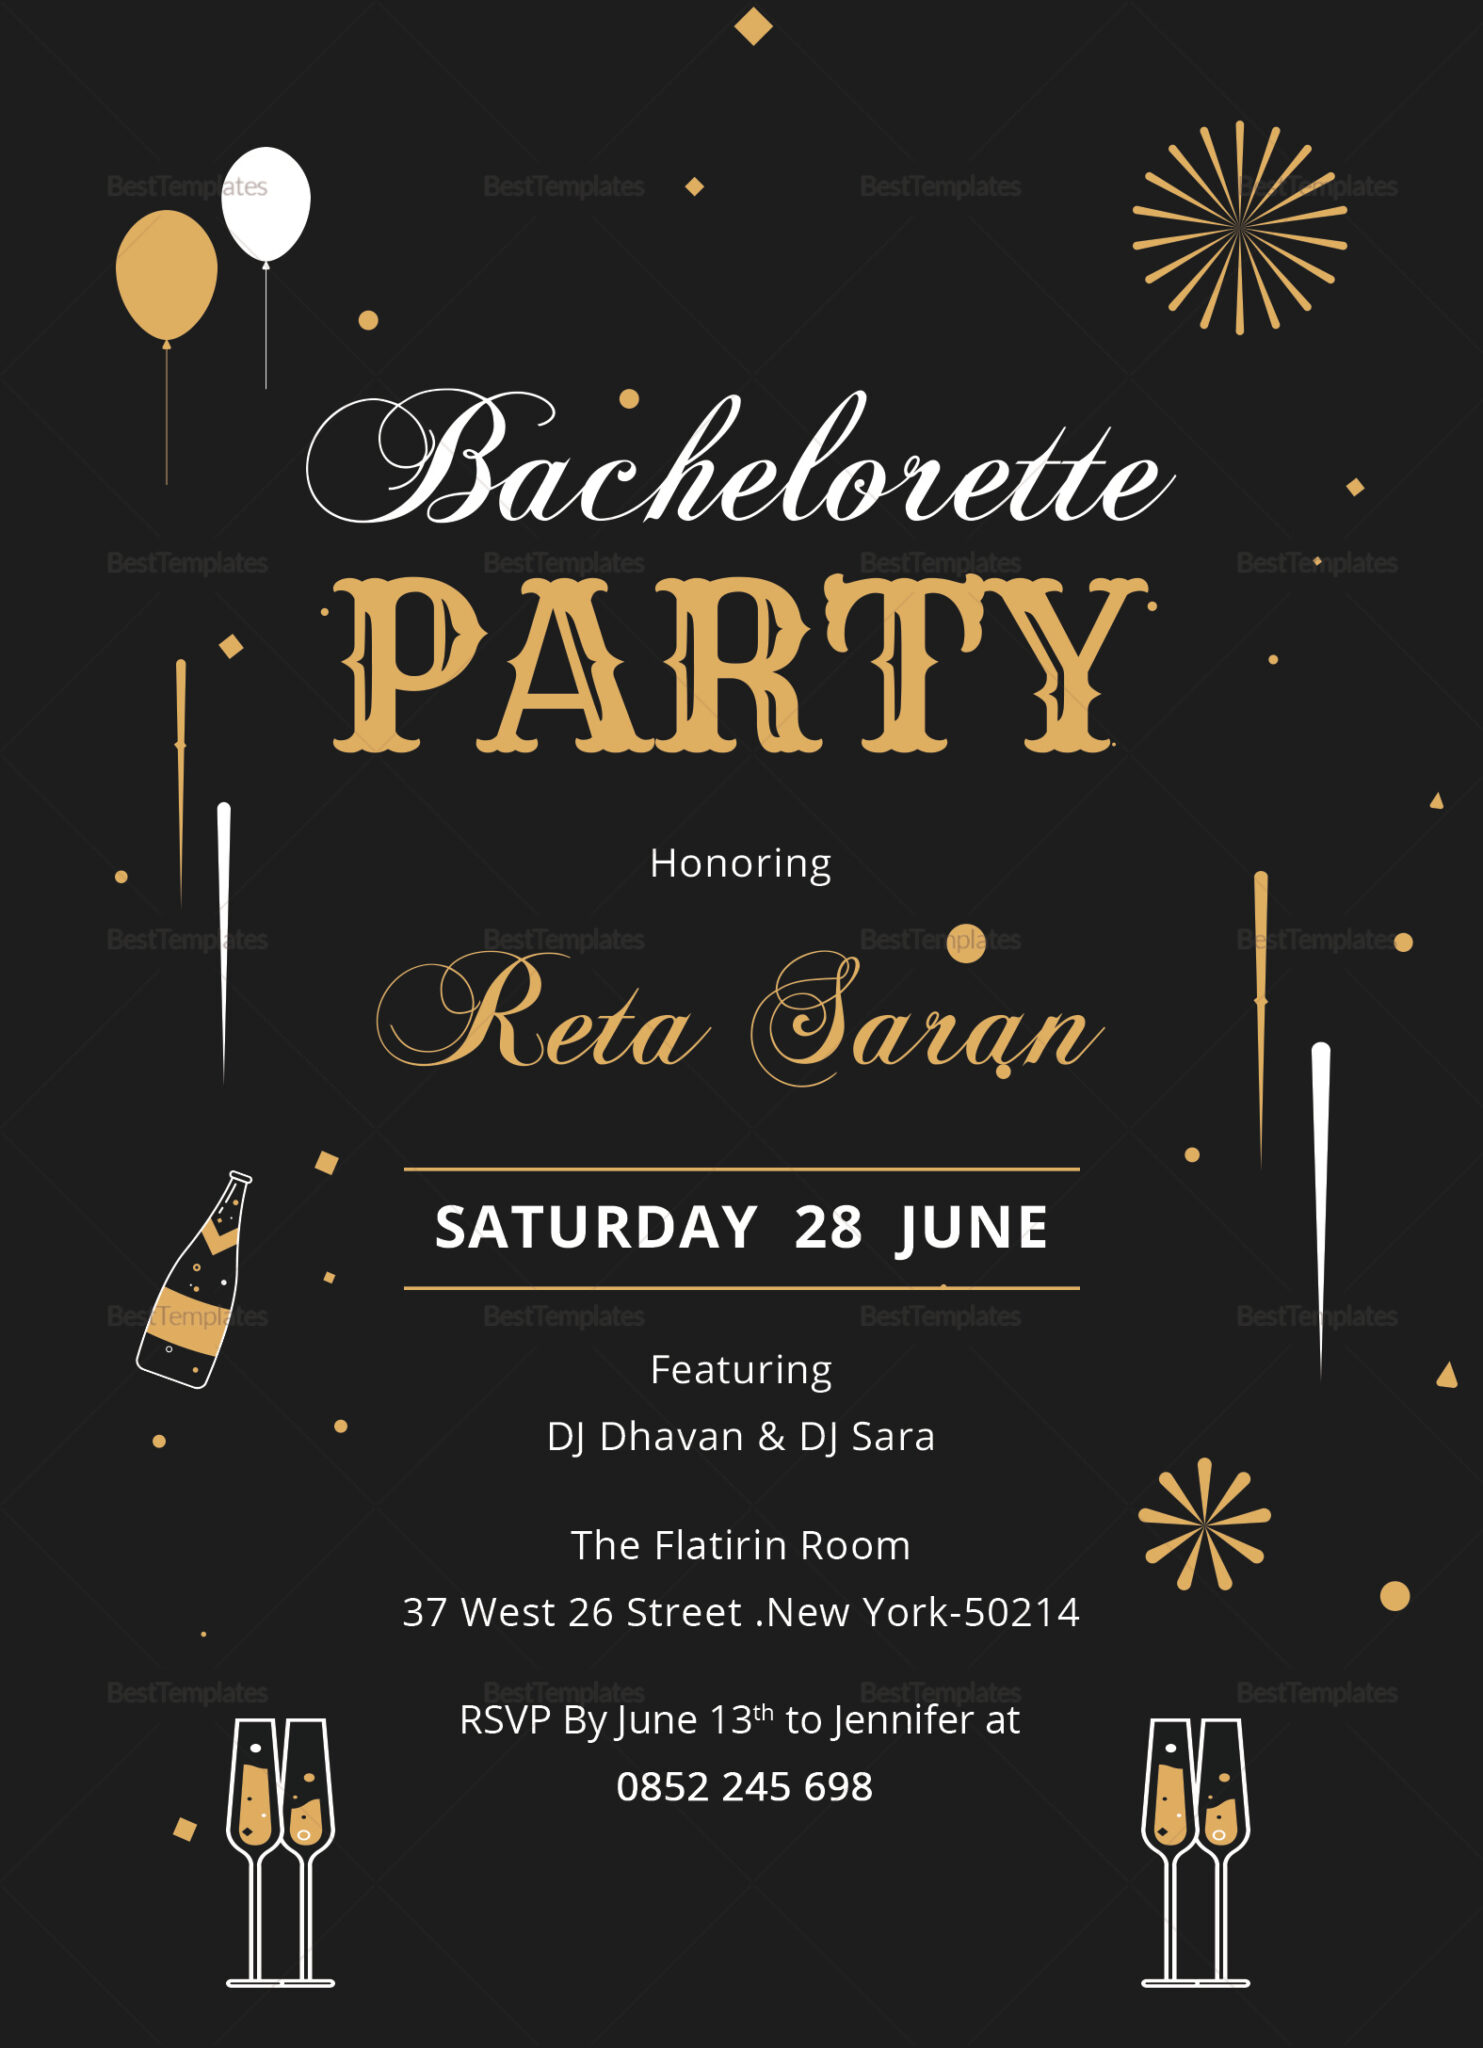 Templates For Party Invitations